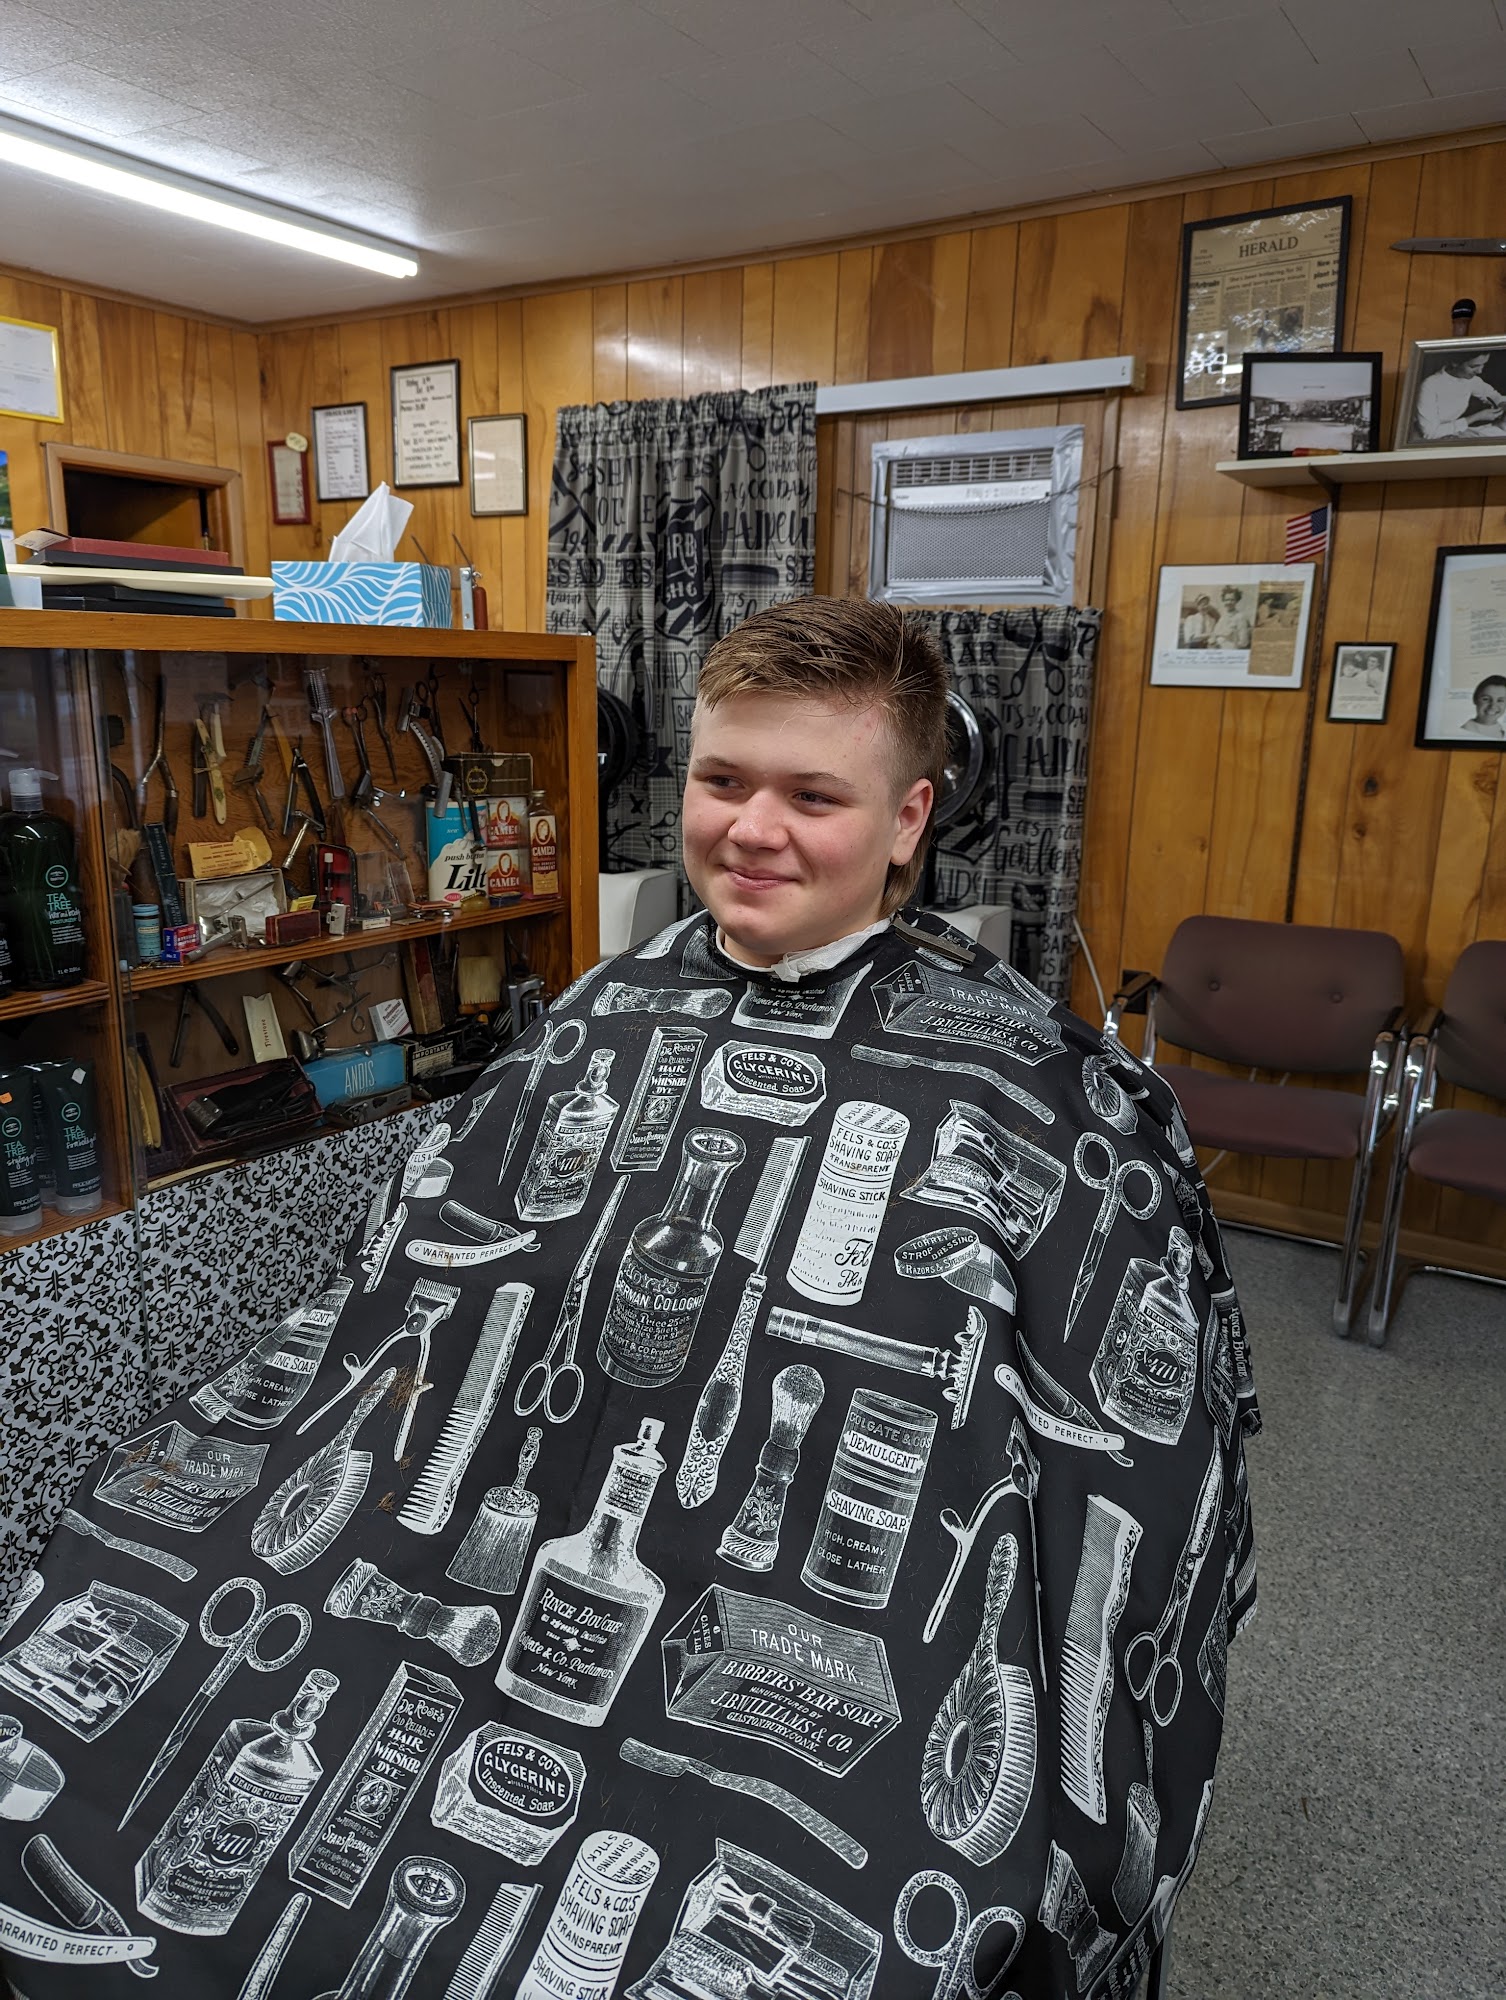 Needham's Barber & Beauty Shop 618 W Houghton Ave, West Branch Michigan 48661